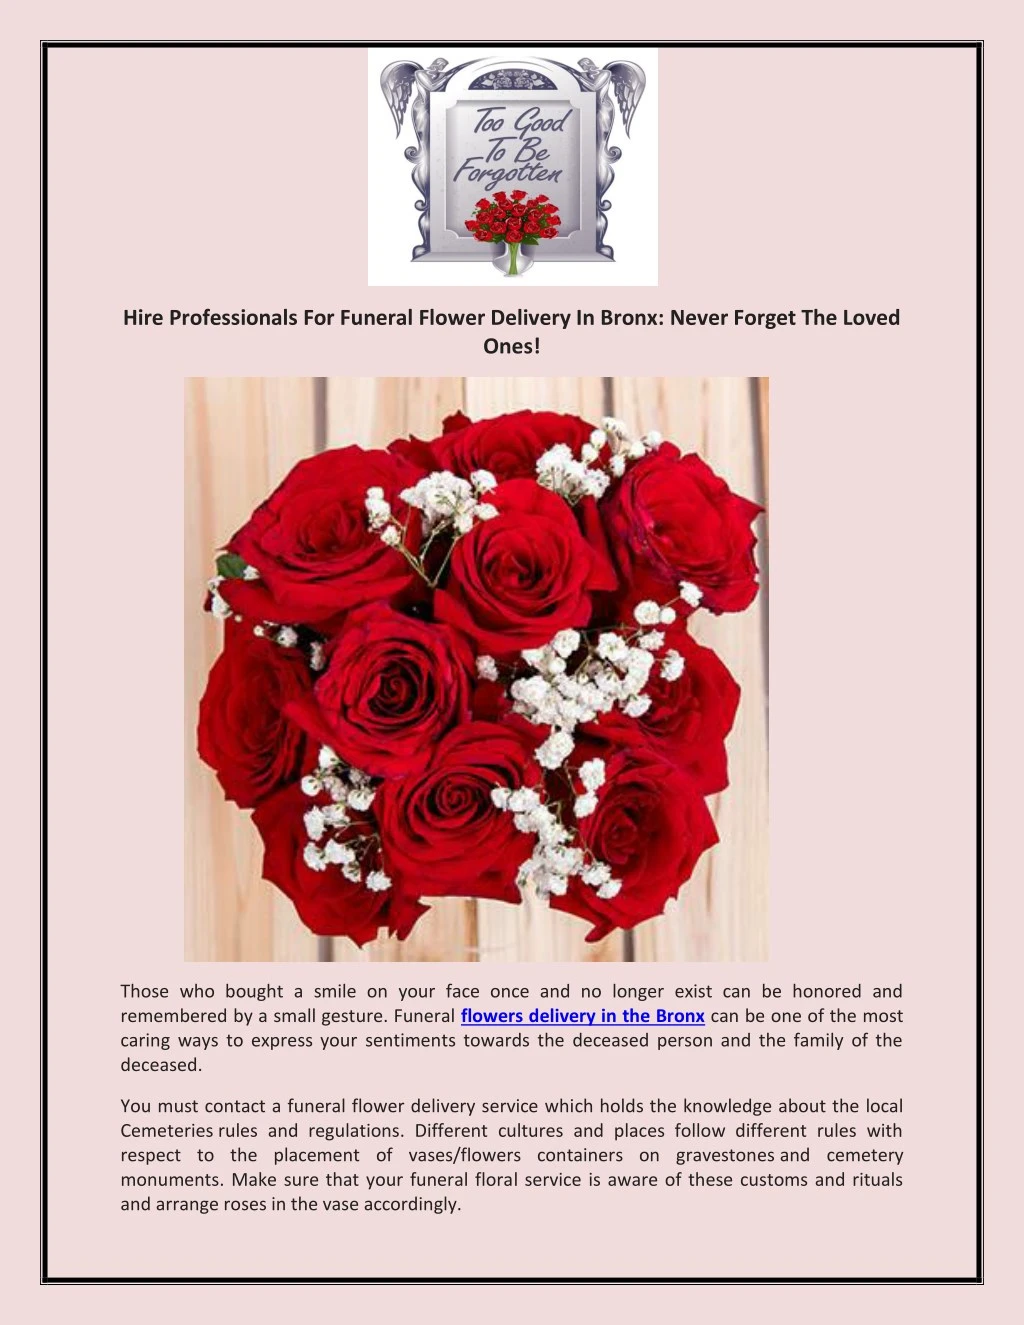 hire professionals for funeral flower delivery